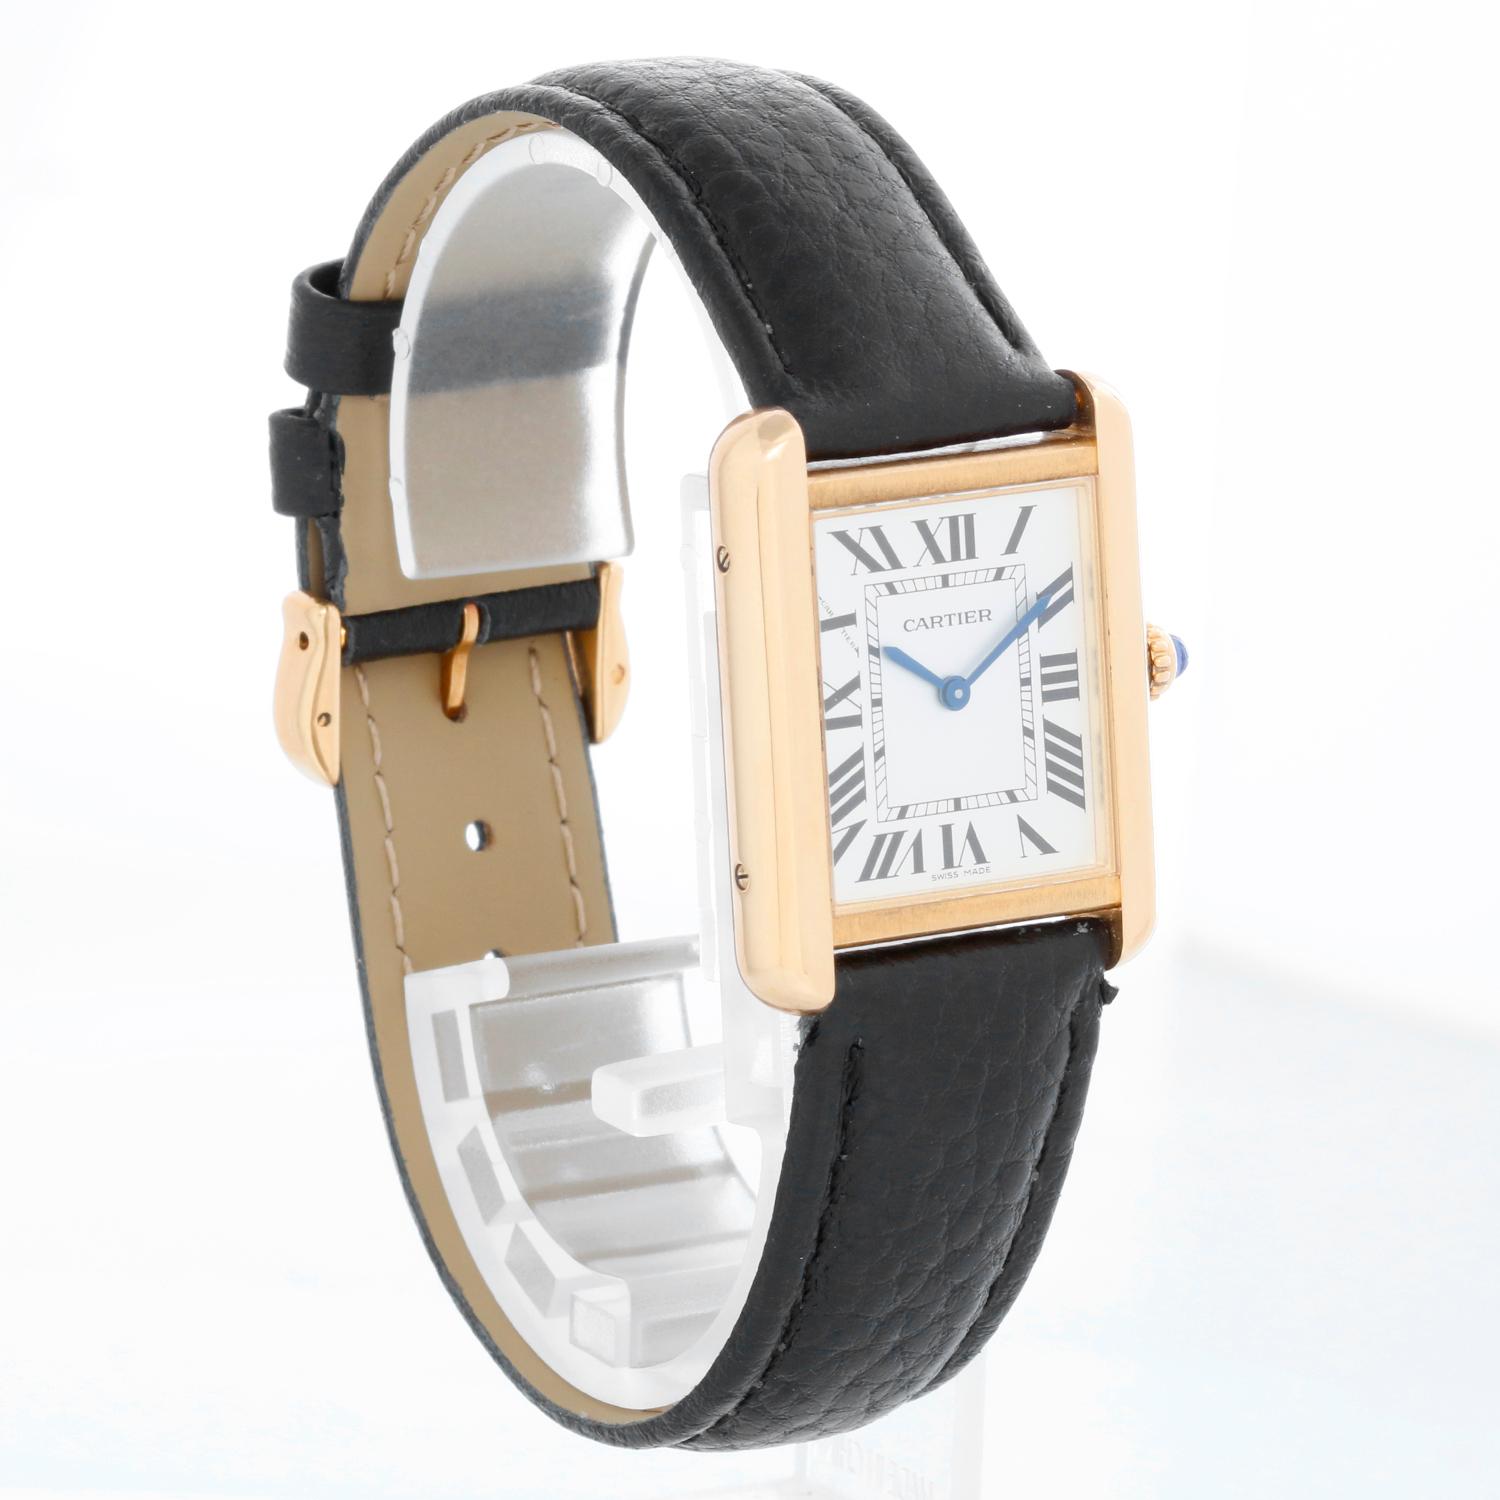 Cartier Tank Solo 18K Yellow Gold Men's Watch W5200002 3168 - Quartz movement. 18k yellow gold case with stainless steel back  (24 mm x 31mm). Silver dial with black Roman numerals. Black Cartier strap with yellow gold tang buckle. Pre-owned with